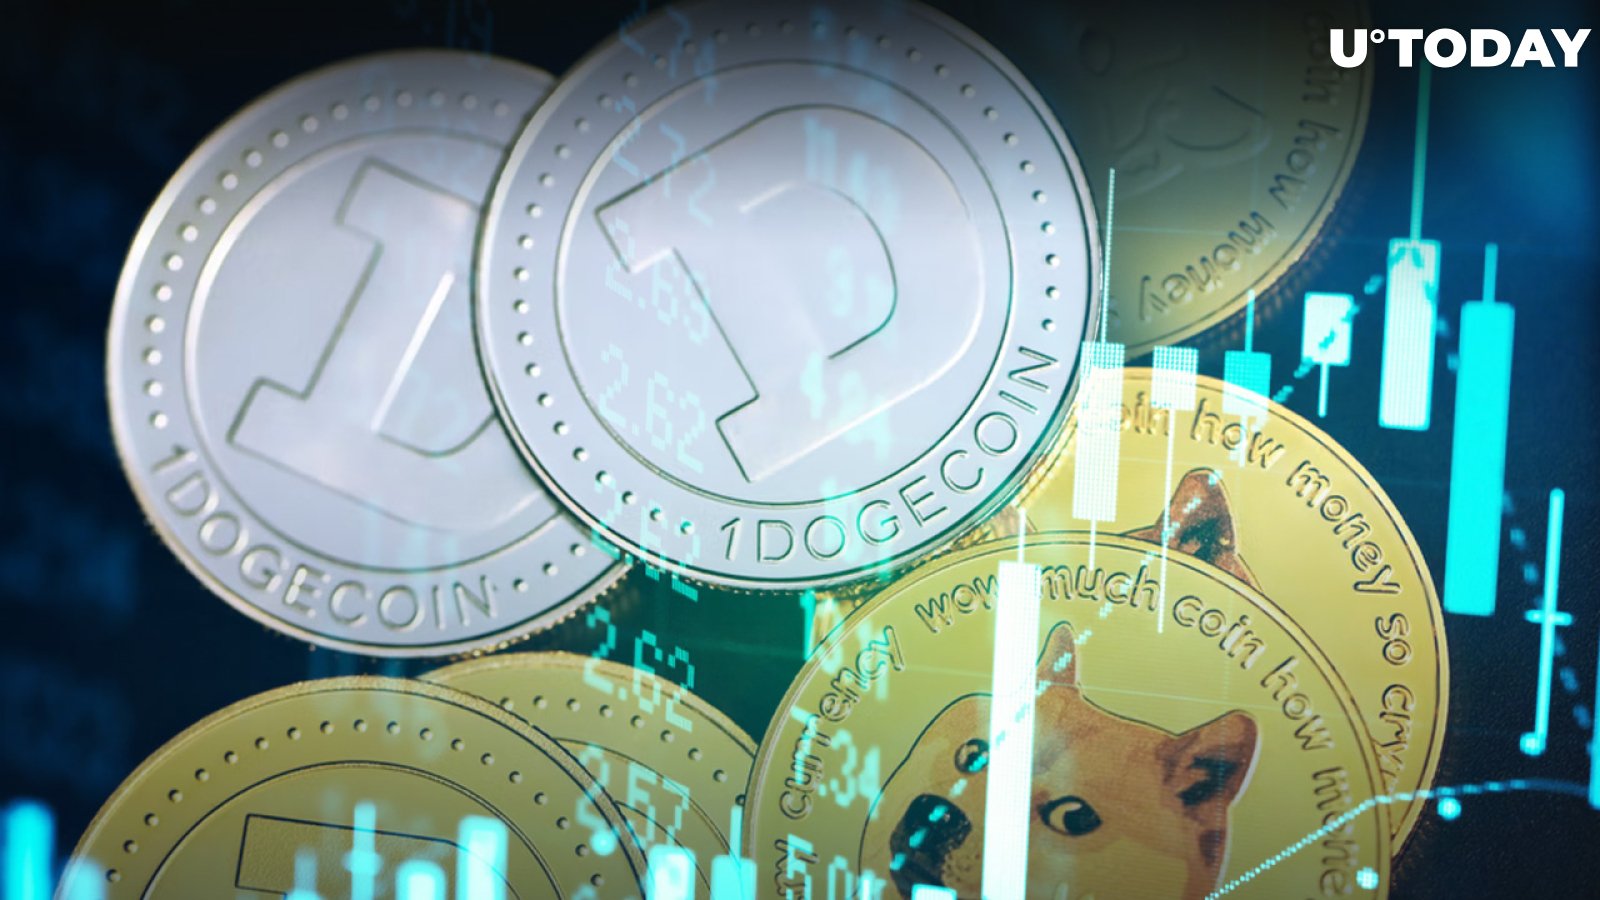 2021 Dogecoin Millionaire Agrees He's "An Exception" But Hasn't Sold Any DOGE